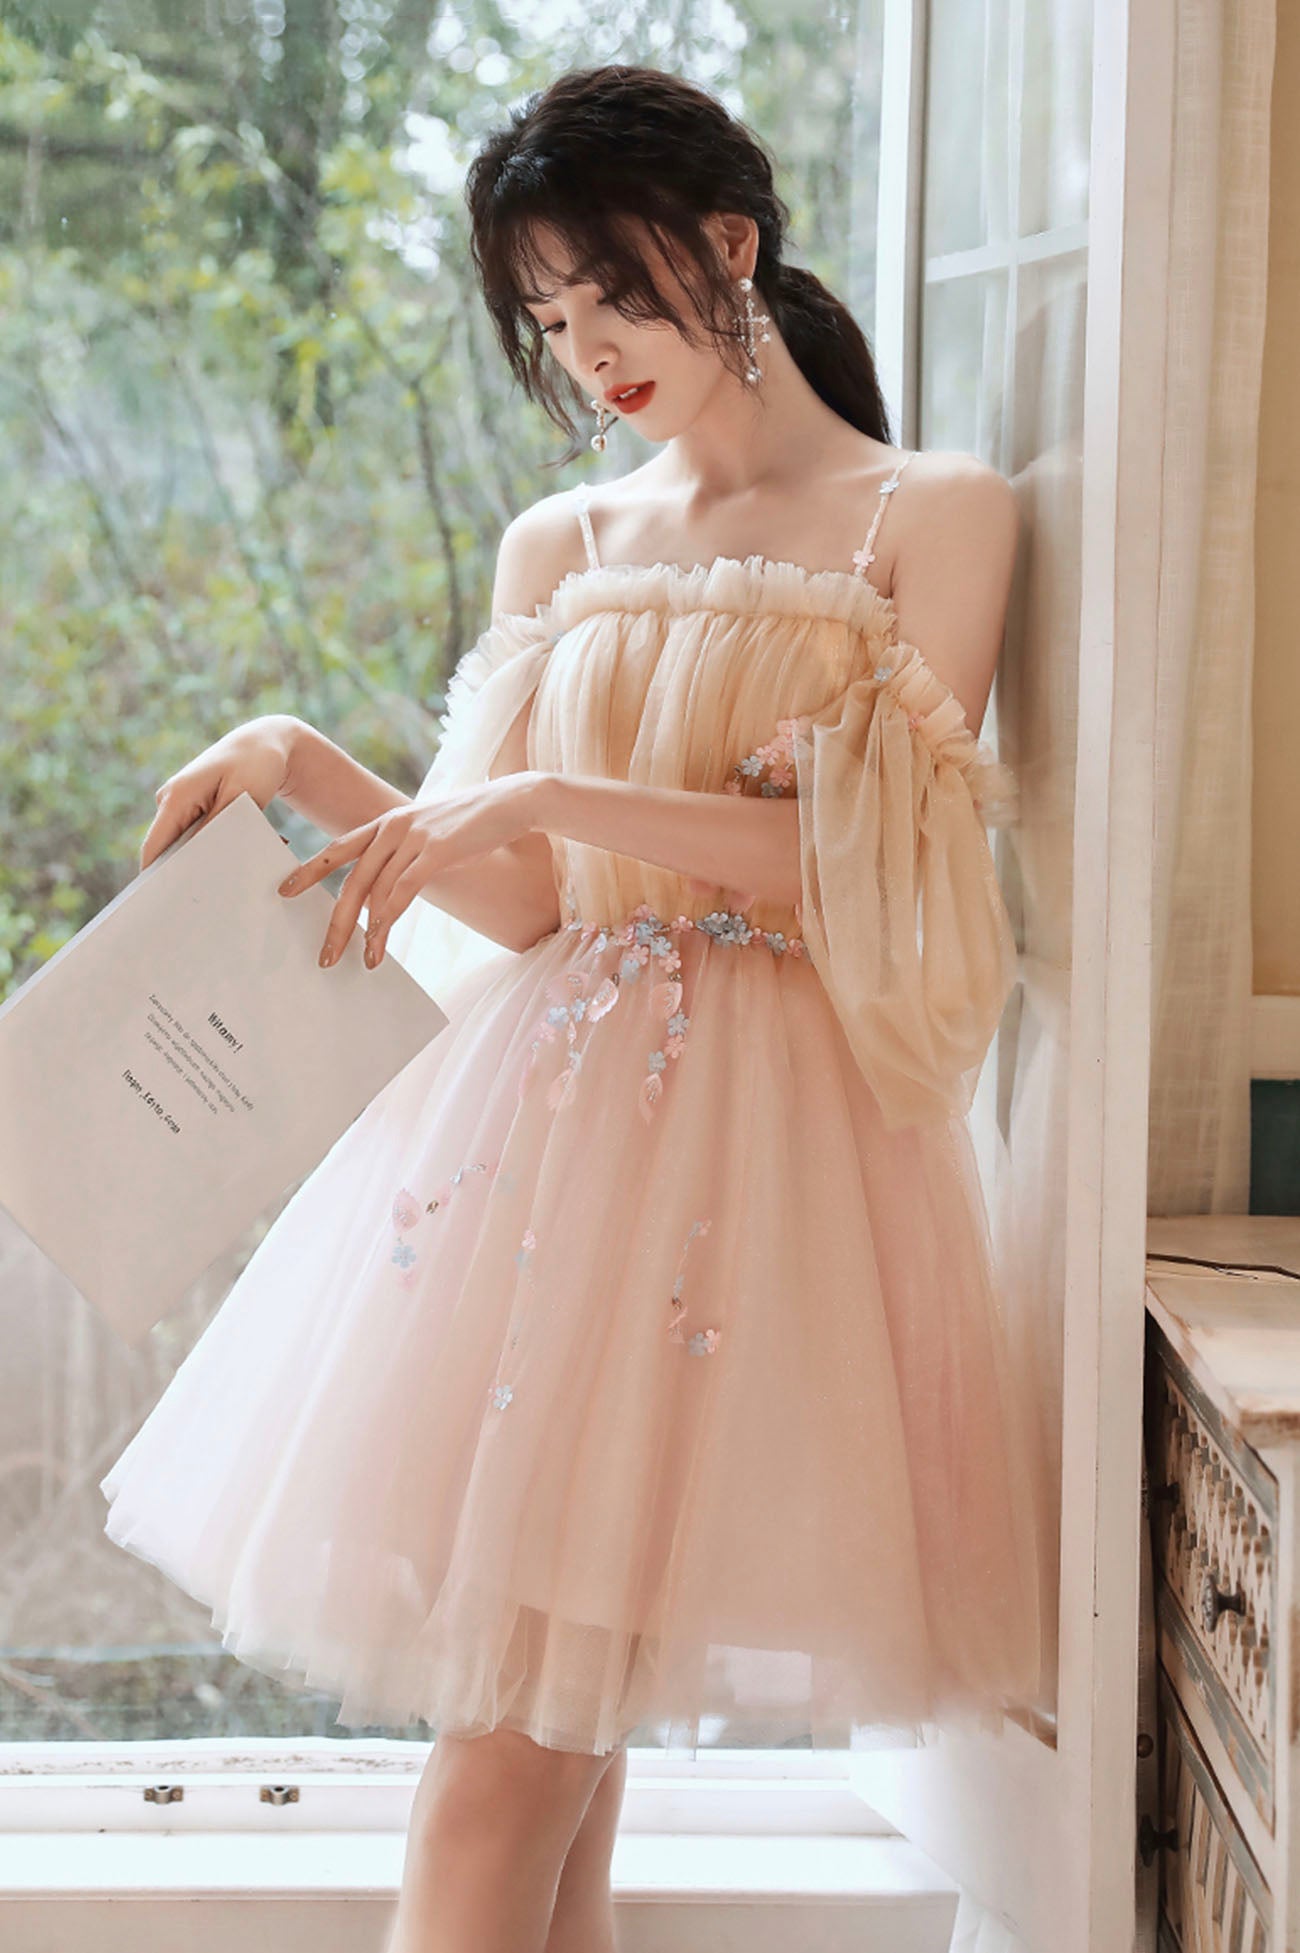 Cute Spaghetti Strap Tulle Short Prom Dress, A-Line Off the Shoulder Mini Party Dress